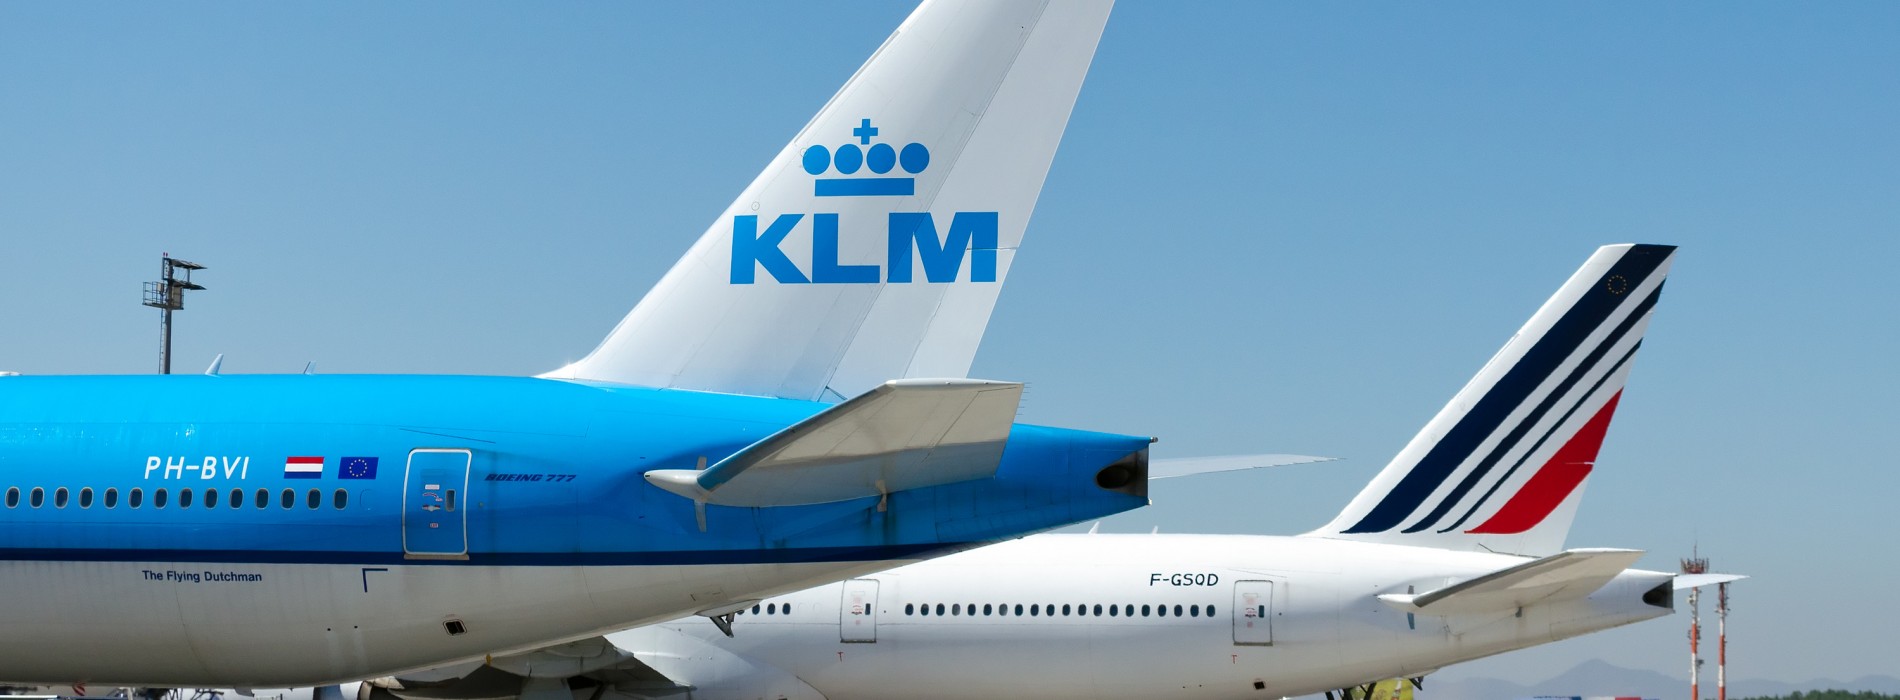 Air France-KLM launches Summer Sale offering fares to over 75 destinations